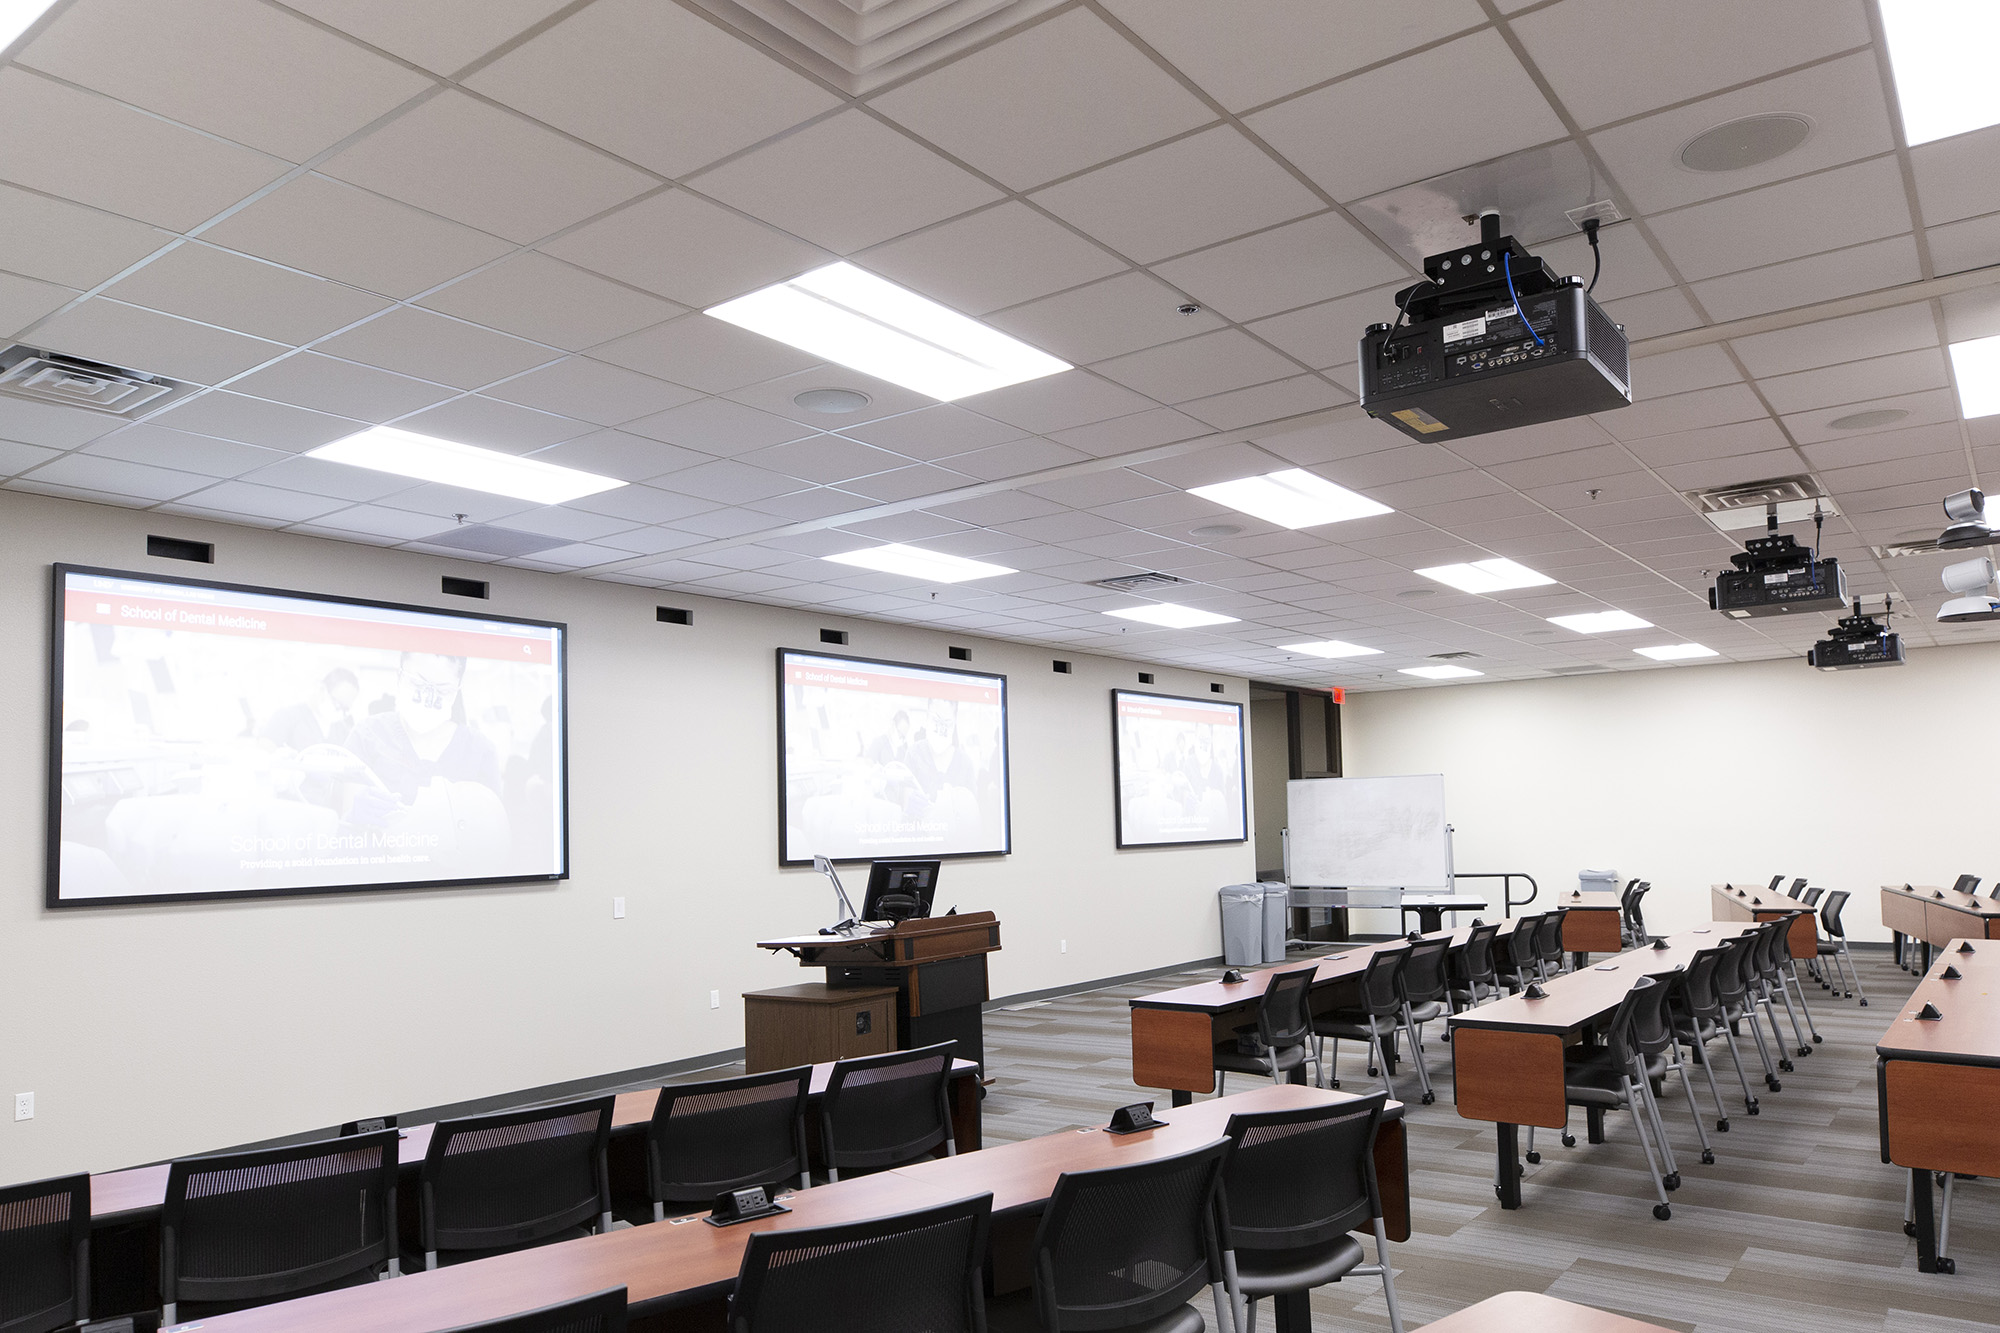 Rear diagonal view of three large projection screens in a U-N-L-V classroom.